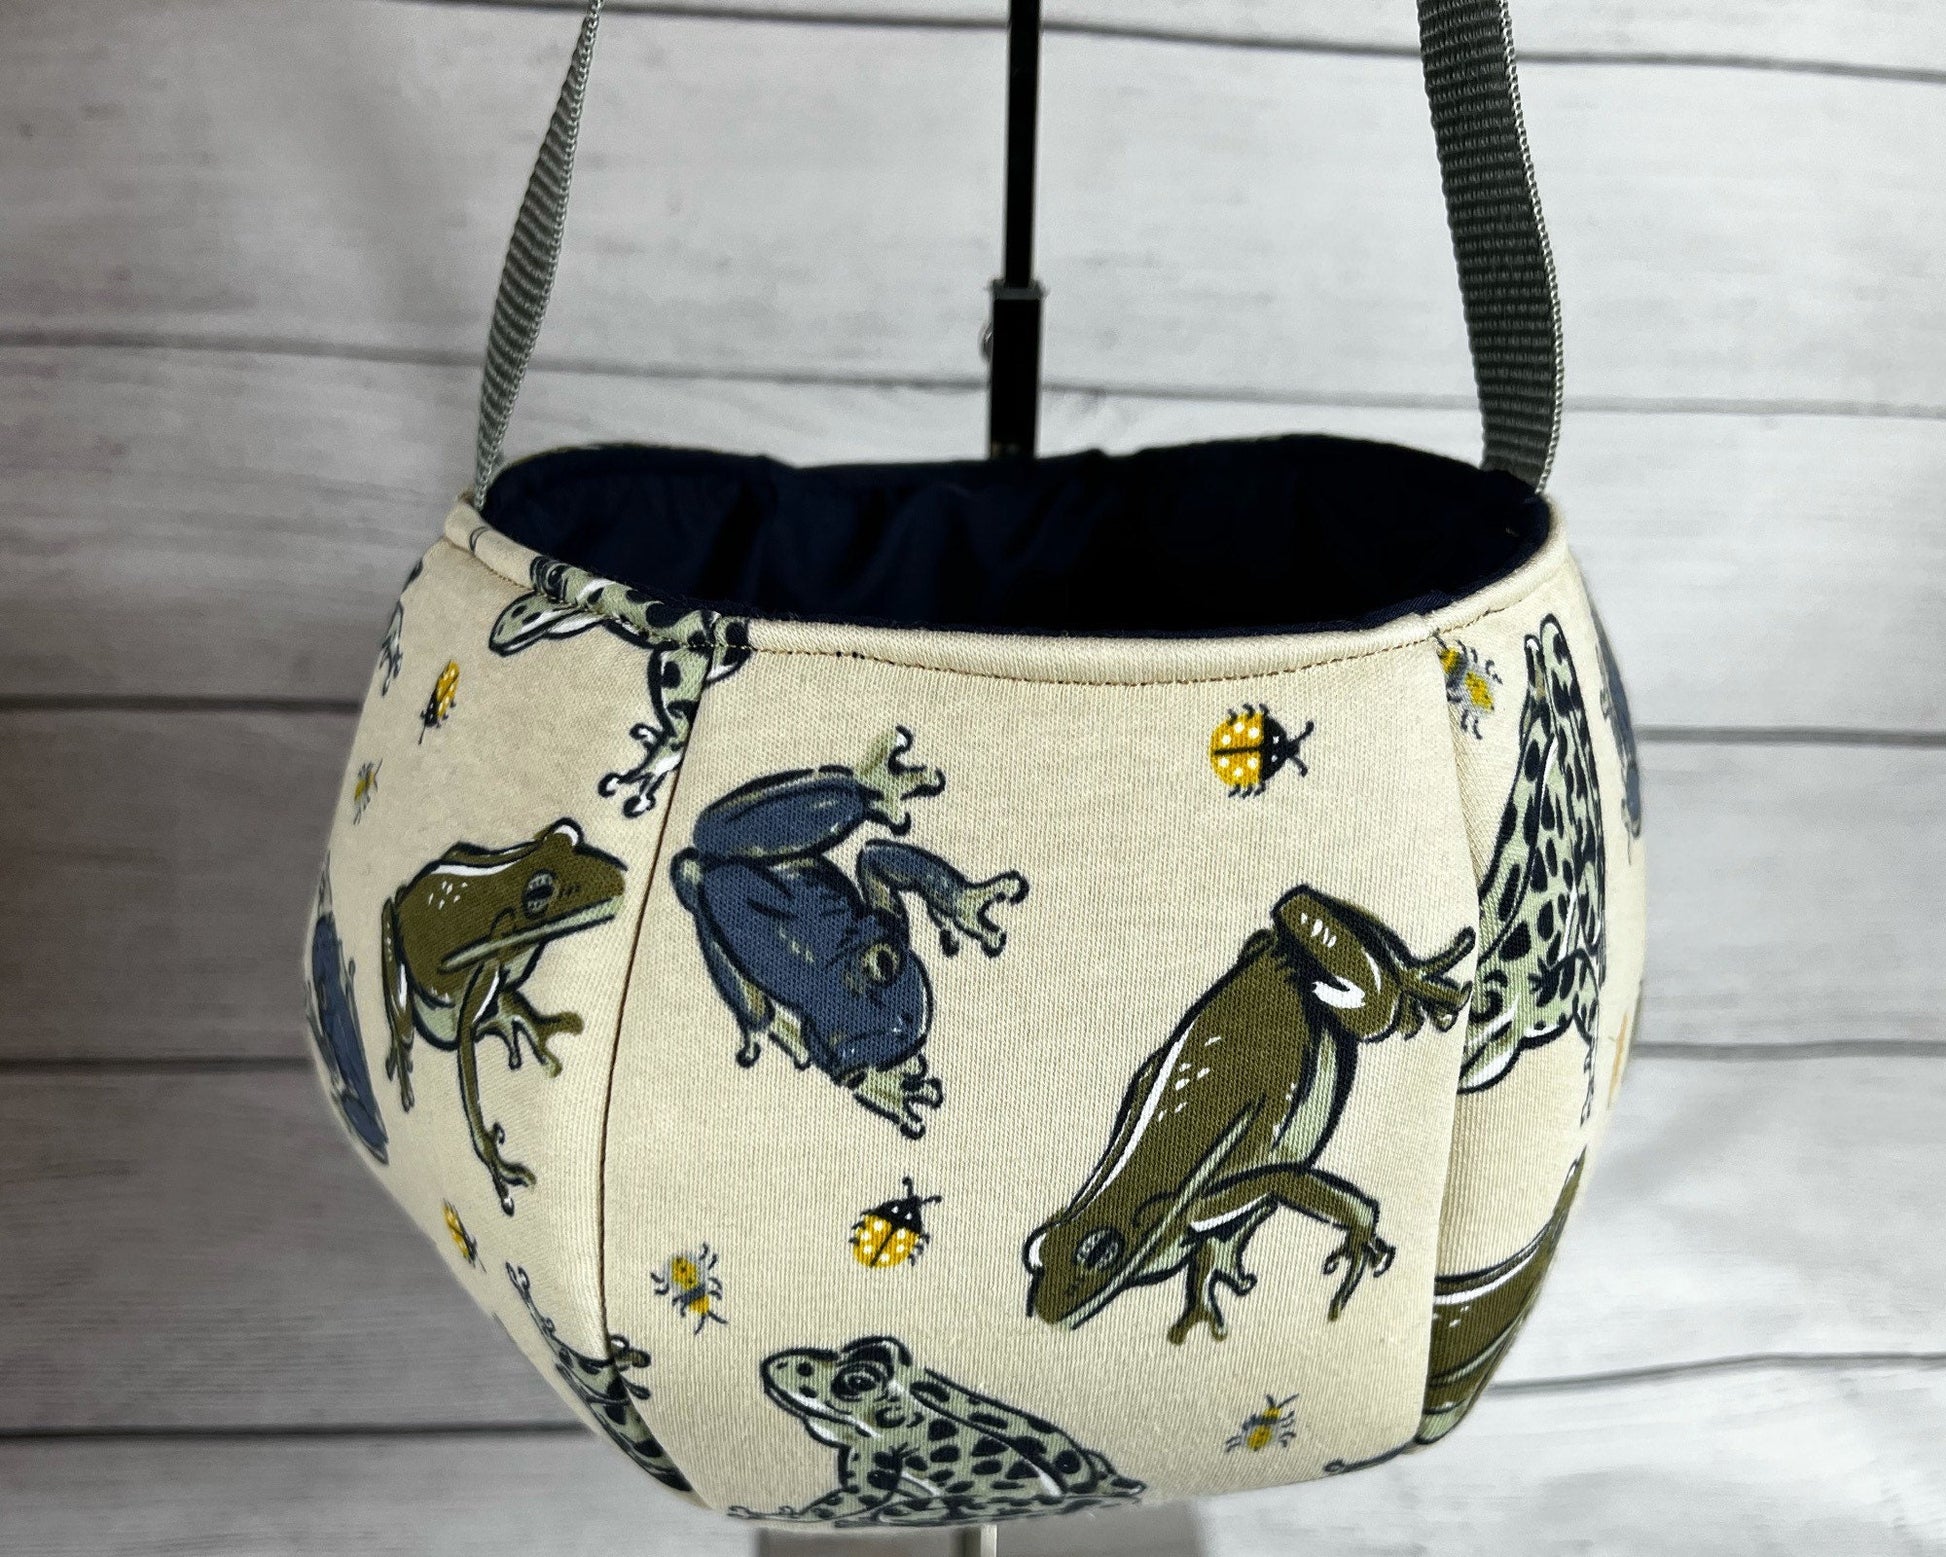 Toad and Frog Tote Bag - Yellow Ladybug - Green Spotted Frog - Animal - Blue Frog - Party - Gift - Everyday - Holiday - Easter - Halloween